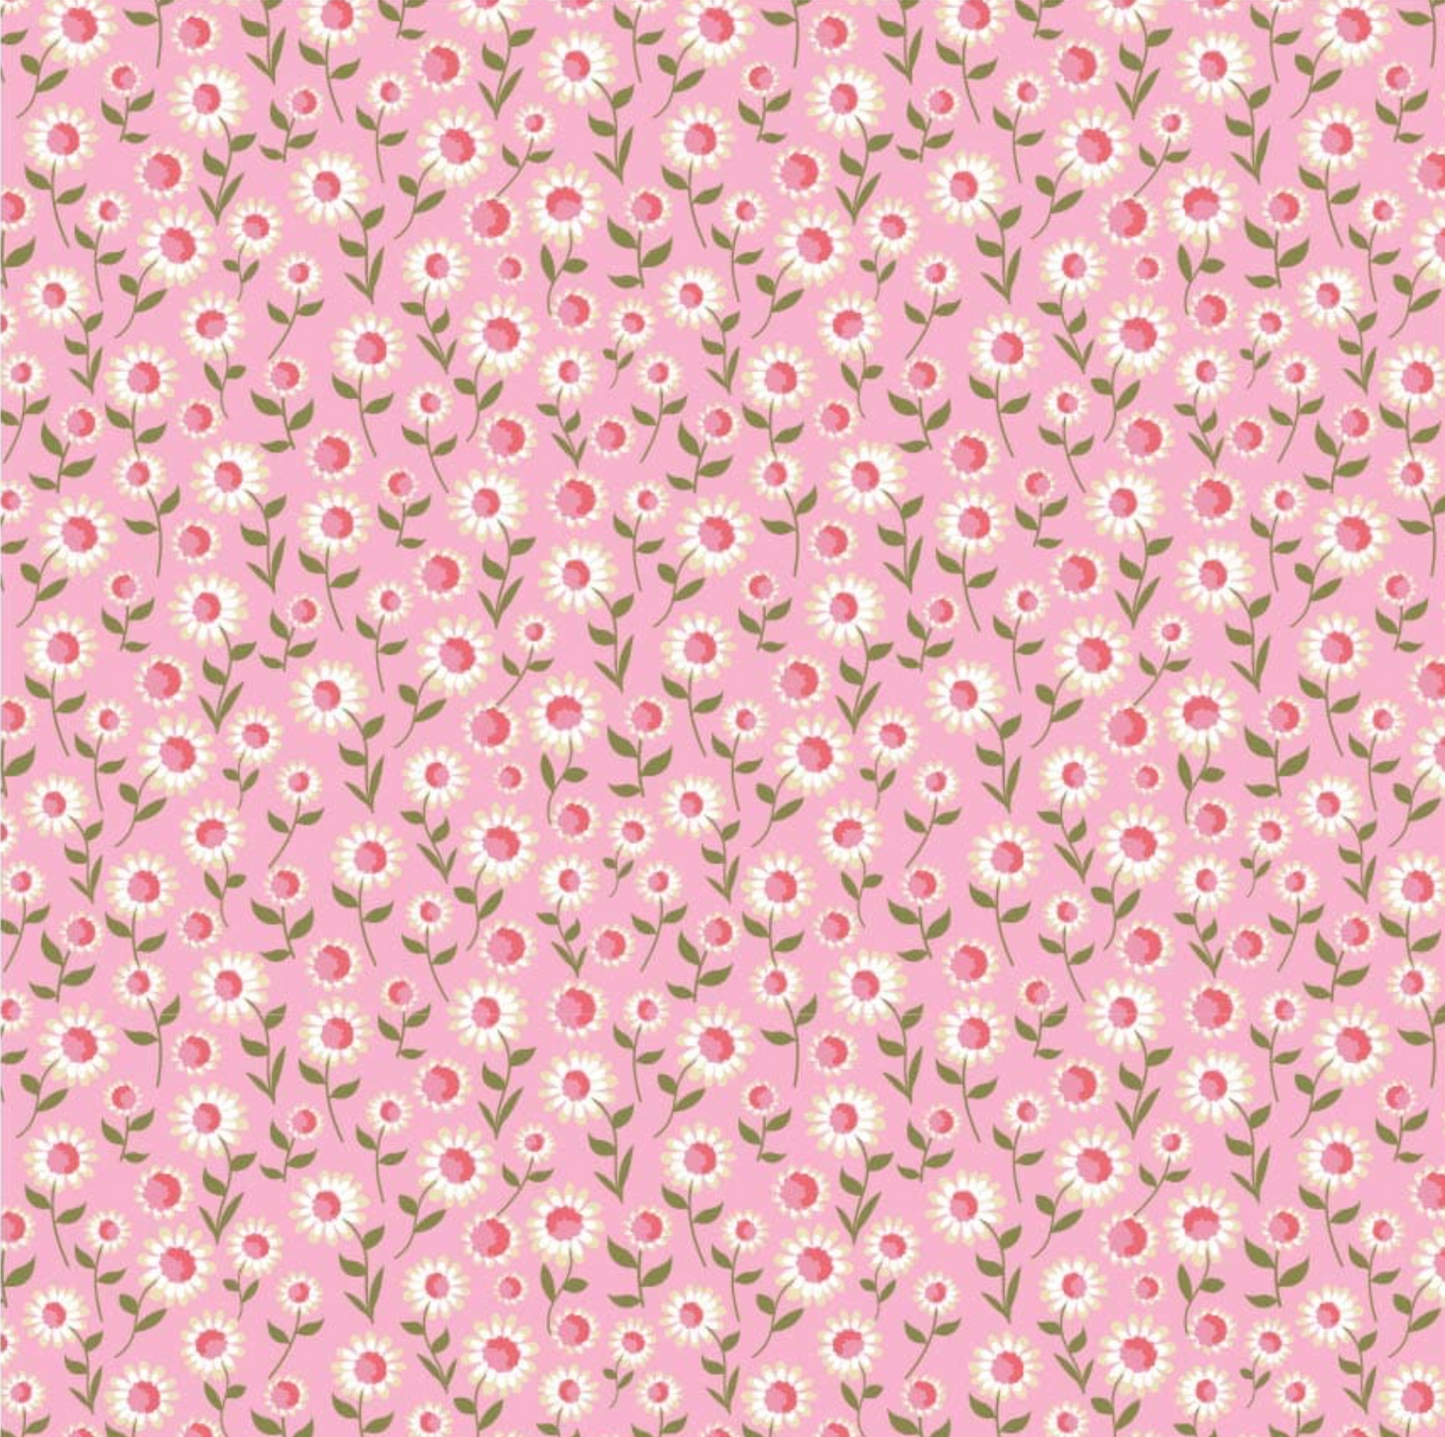 Prairie Sisters Homestead Daisy Dukes Pink PH23404, sold by the 1/2 yard